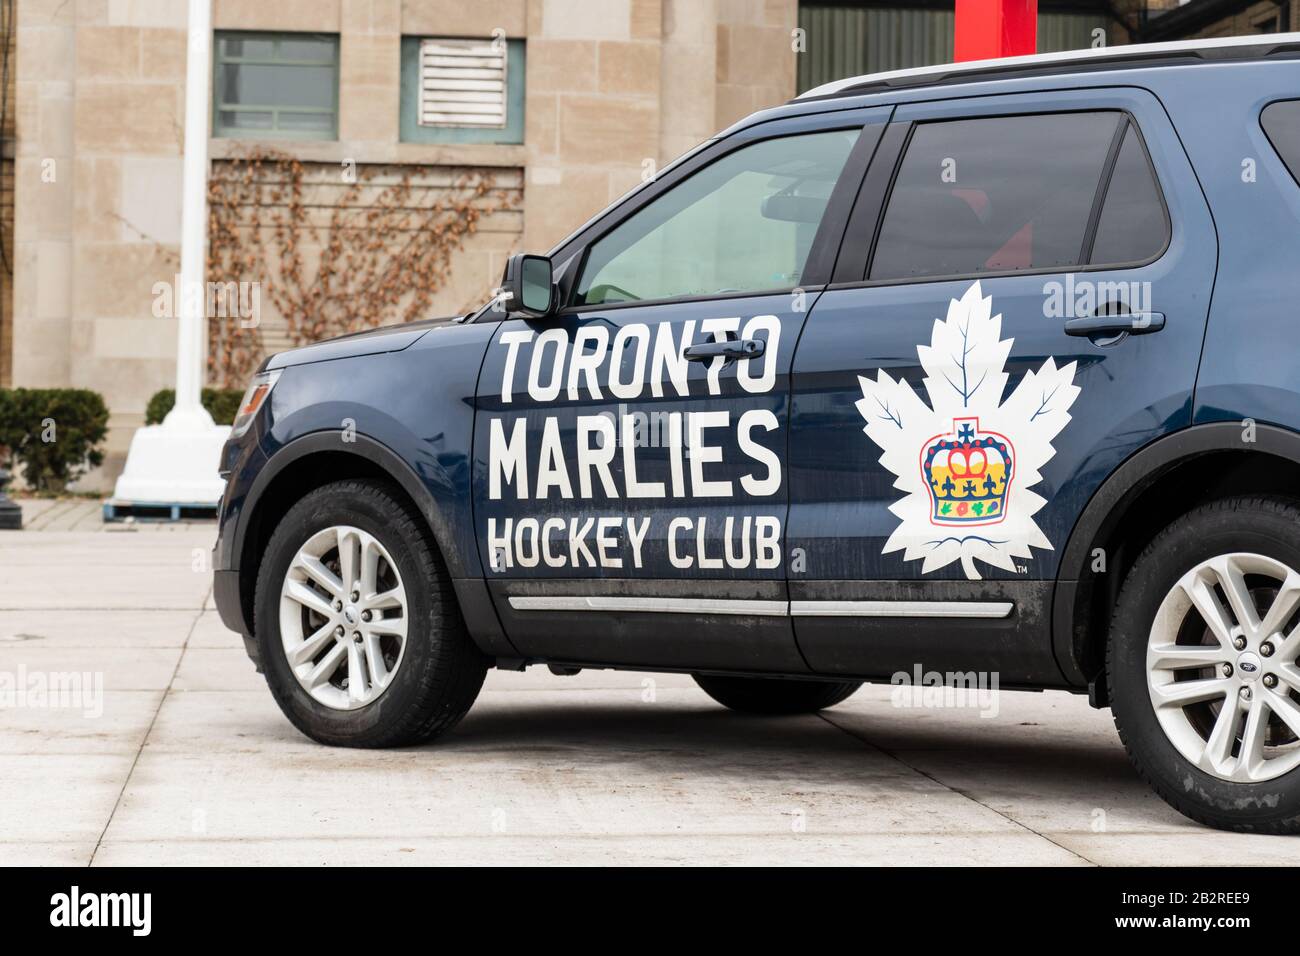 Toronto Marlies Hockey Club, member of the AHL logo on side of vehicle at their home arena, the Coca Cola Coliseum. Stock Photo